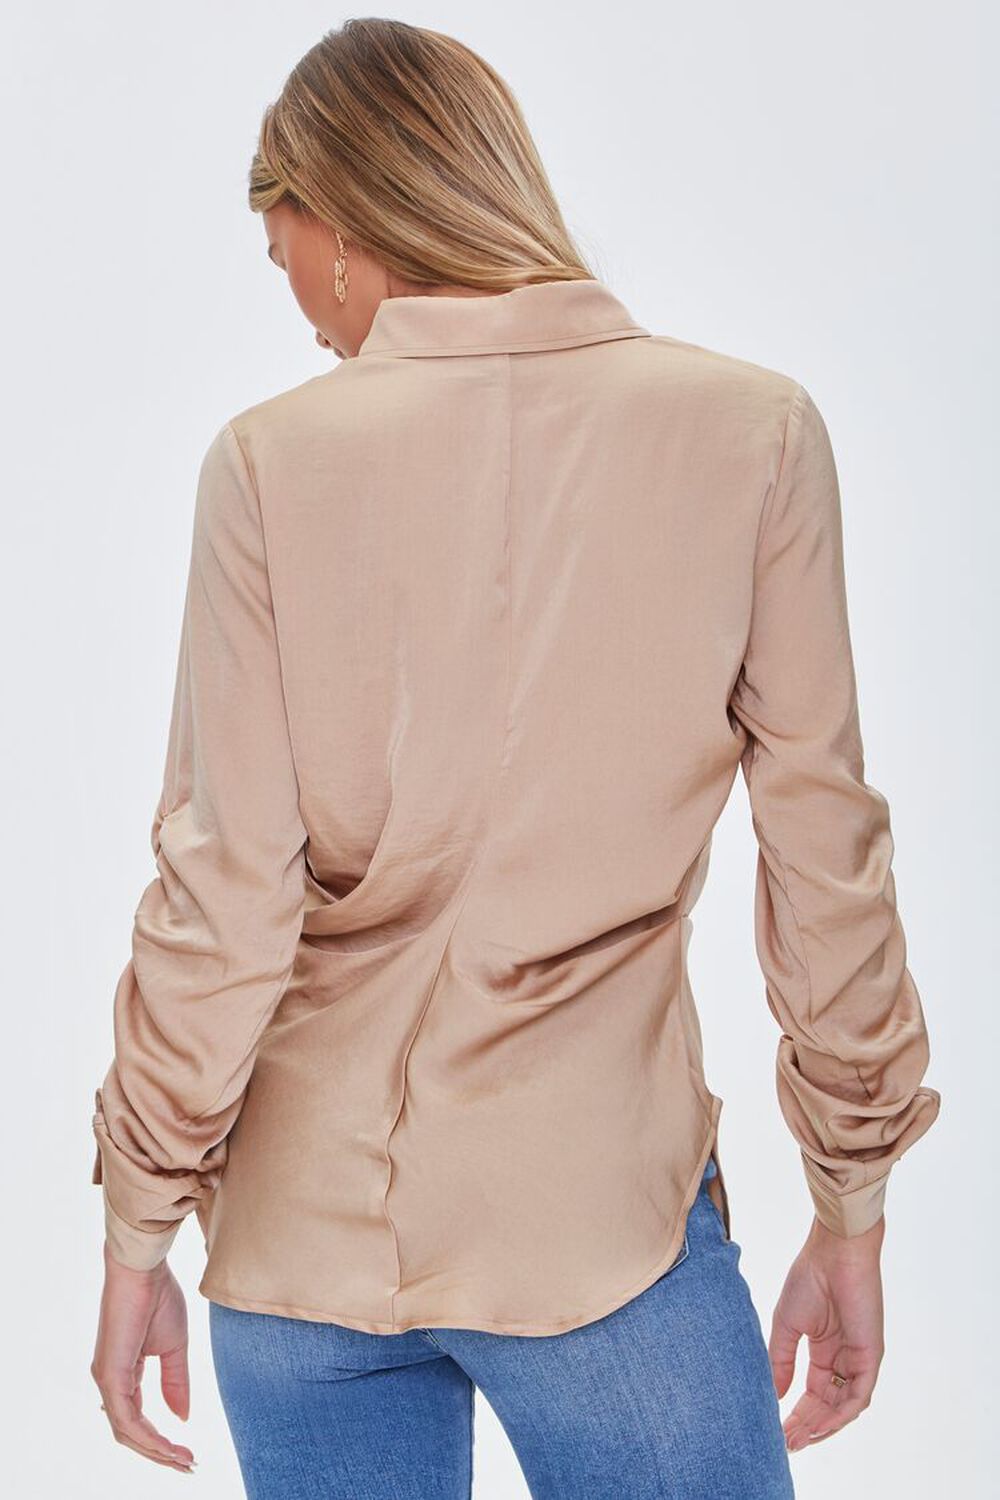 TAN Ruched Button-Front Shirt, image 3